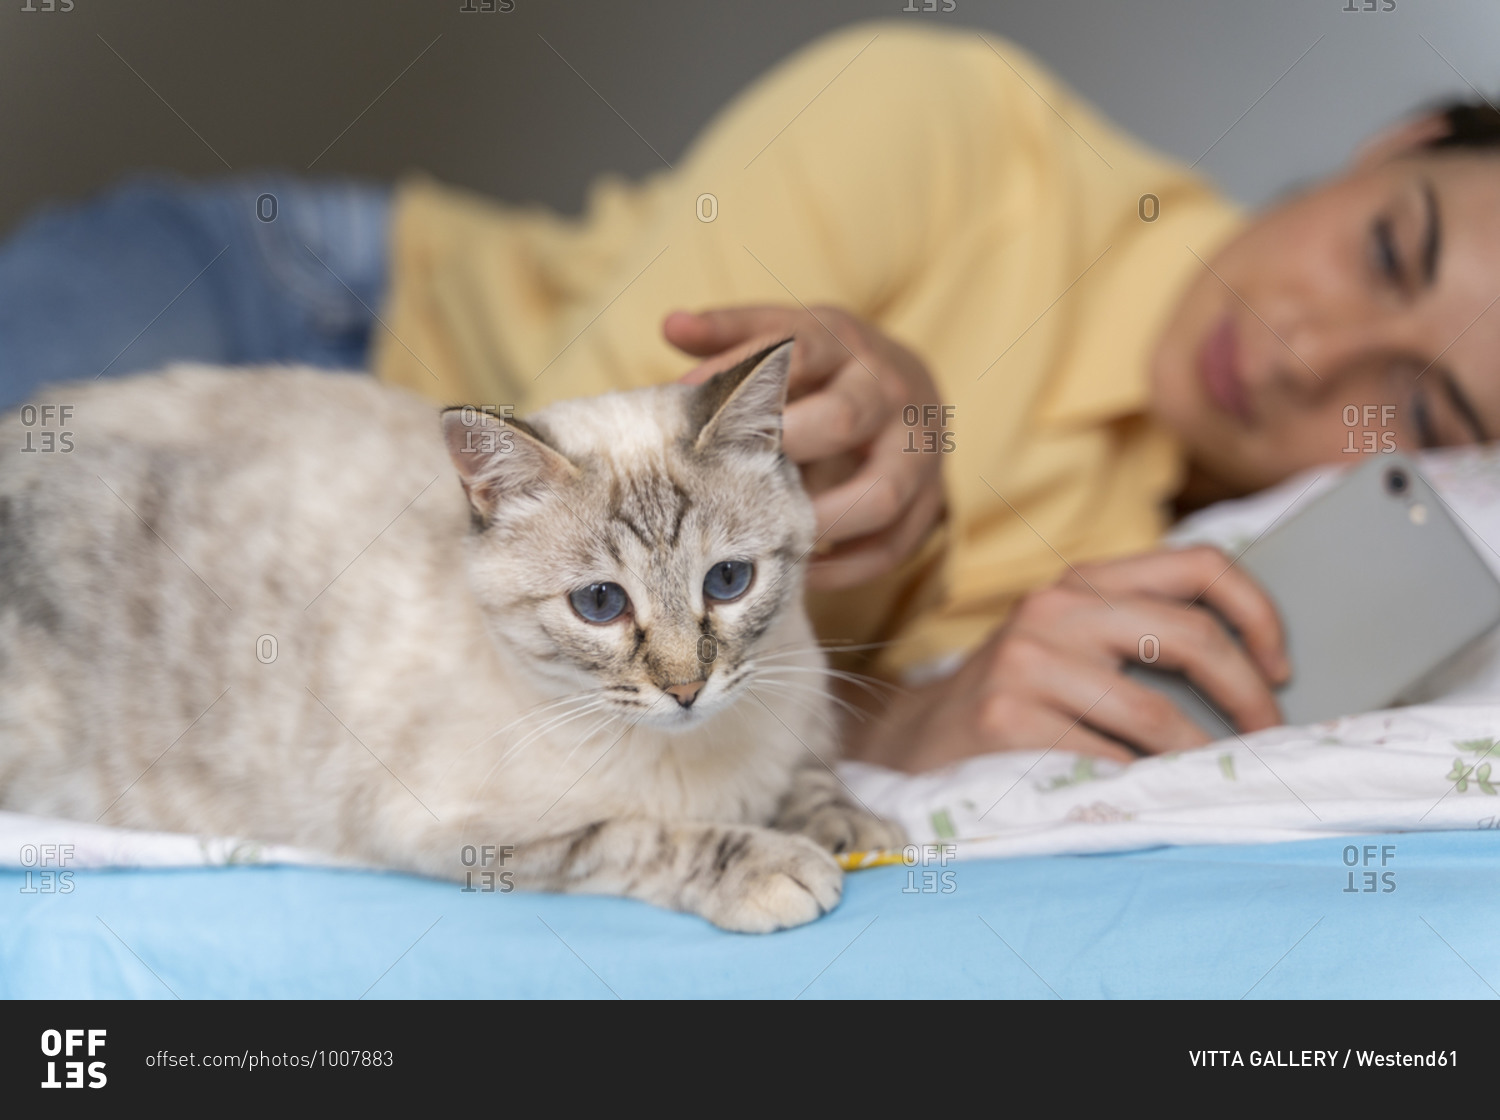 Woman with phone looking at cat while lying in bedroom